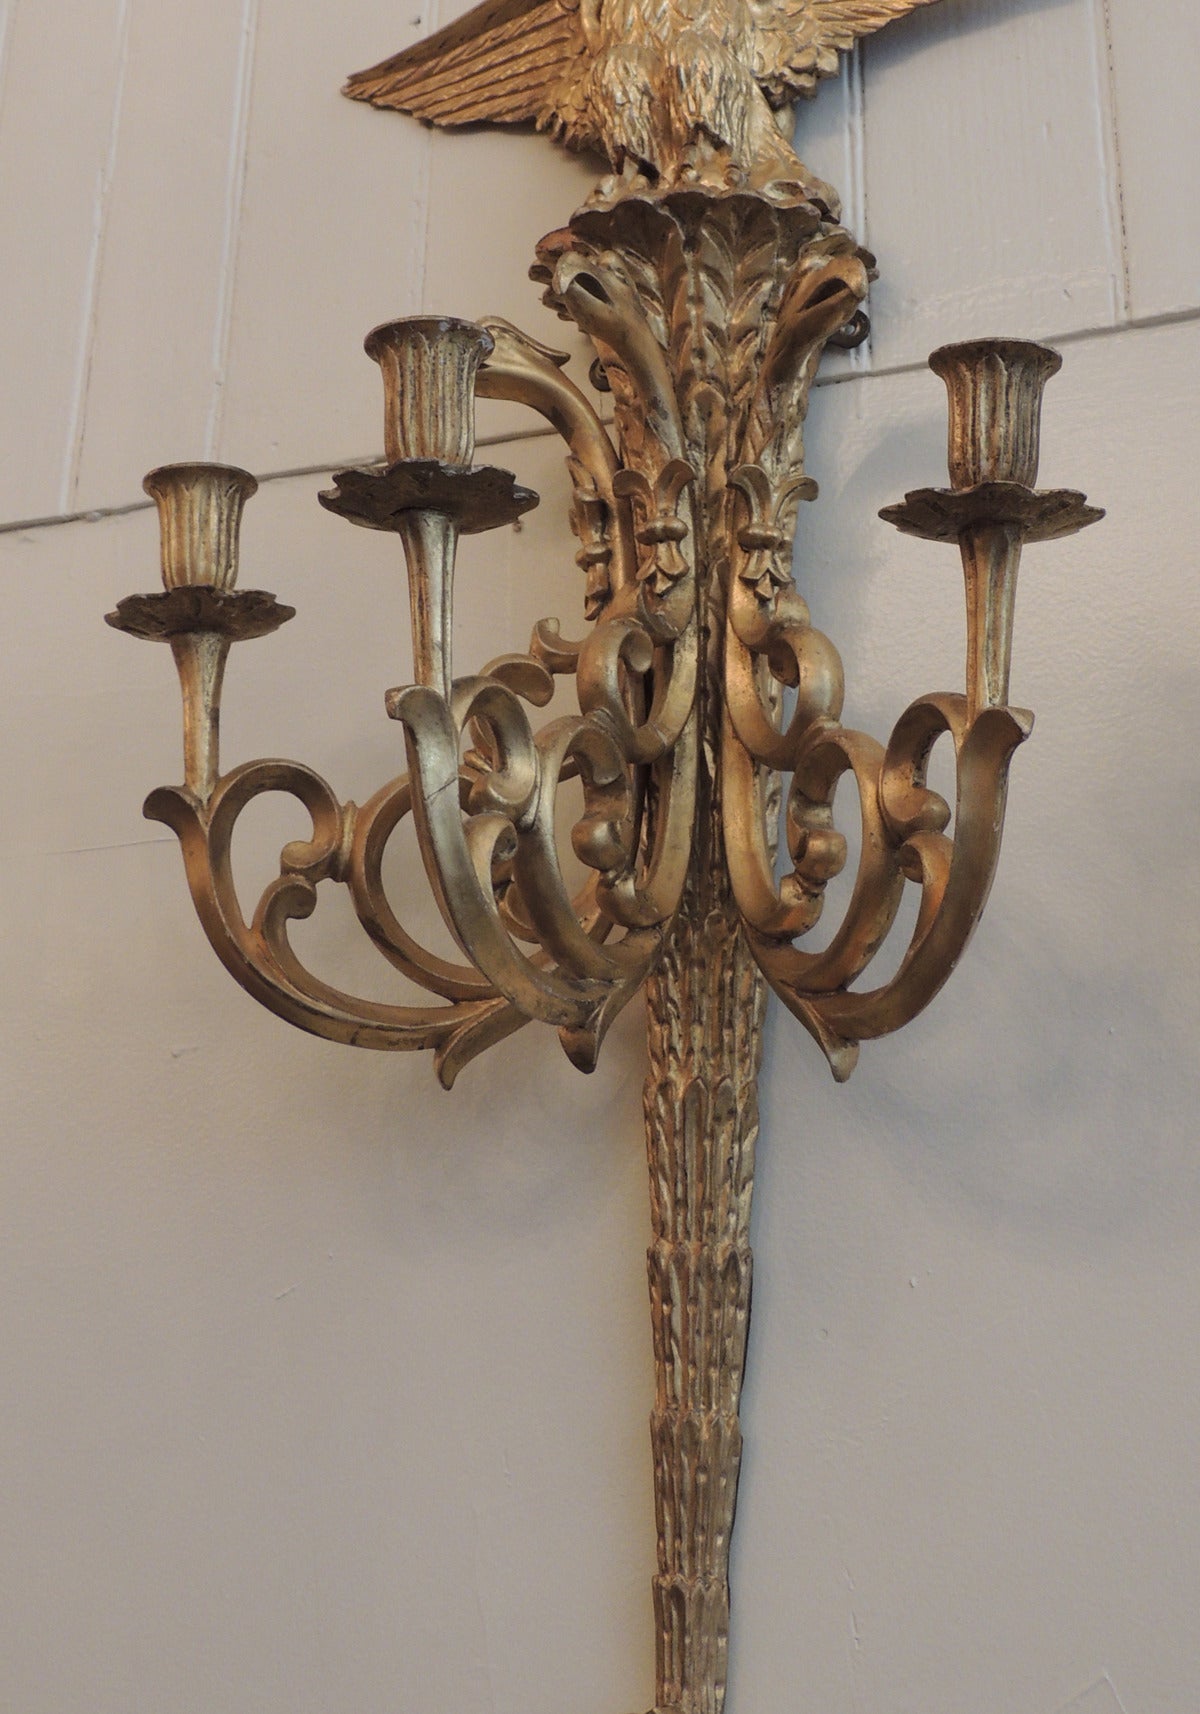 Pair of Early 19th C English Regency Carved Gilt Sconces 2